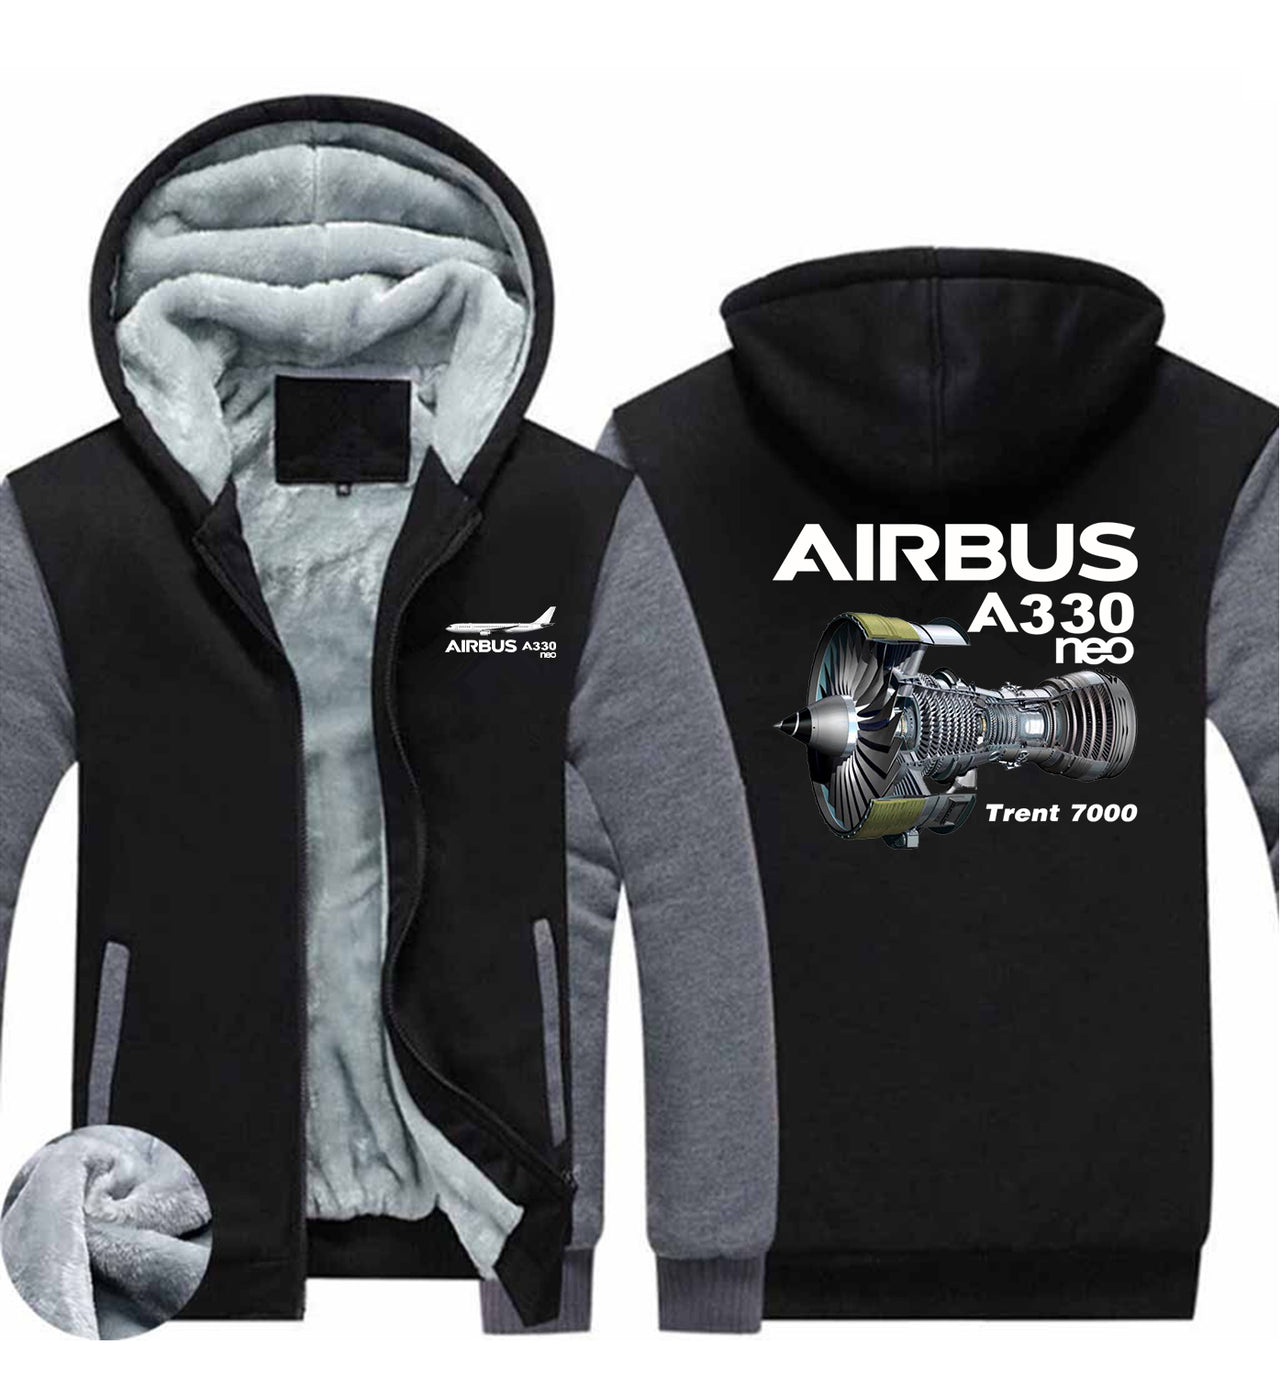 The Airbus A330neo Designed Zipped Sweatshirts